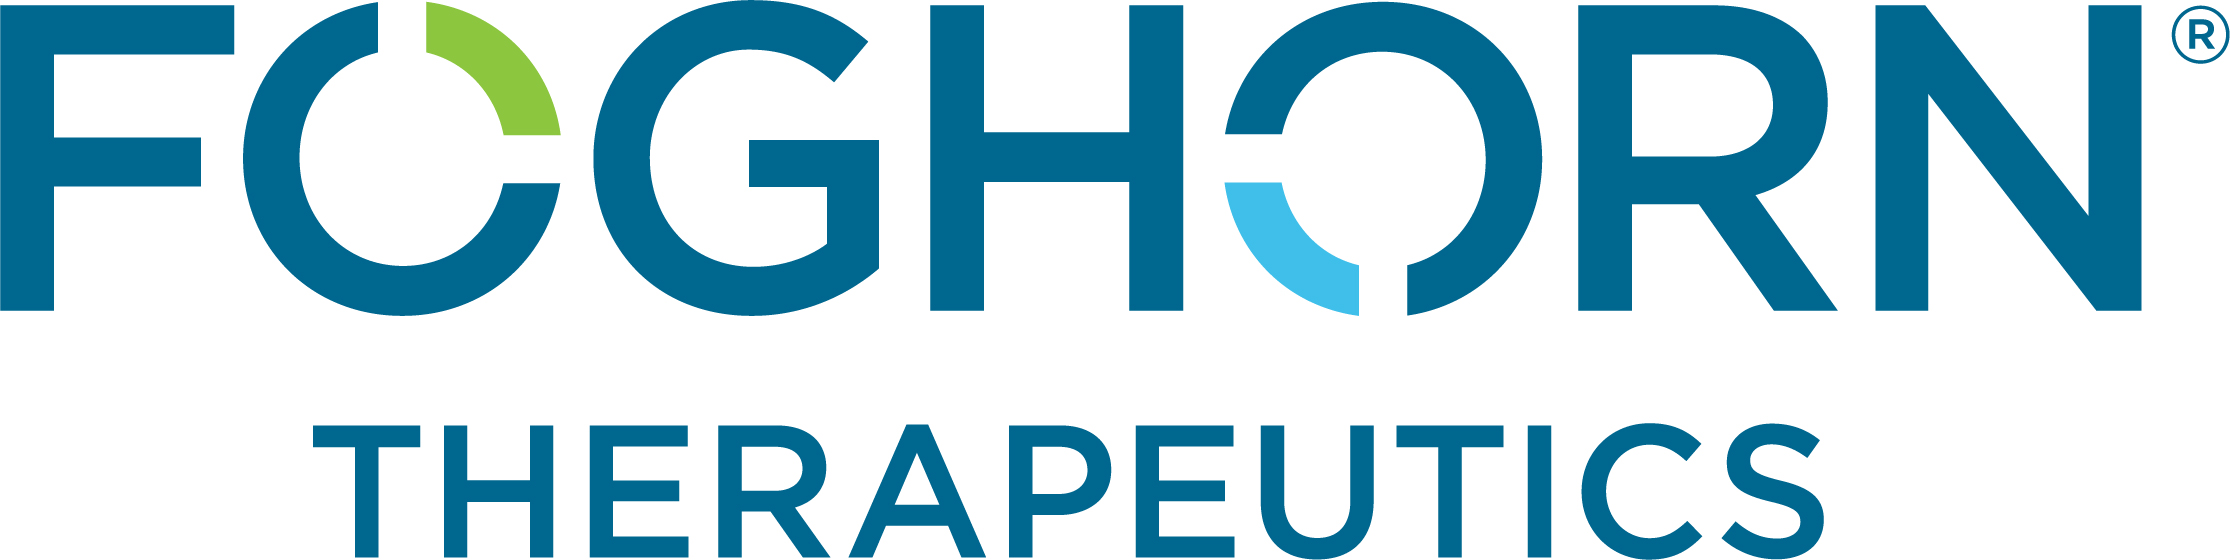 Foghorn Therapeutics Announces Clinical Data from Phase 1 Study of FHD-286, a Novel BRG1/BRM Inhibitor, in Patients with Advanced Hematologic Malignancies, to be Presented at American Society of Hematology Annual Meeting